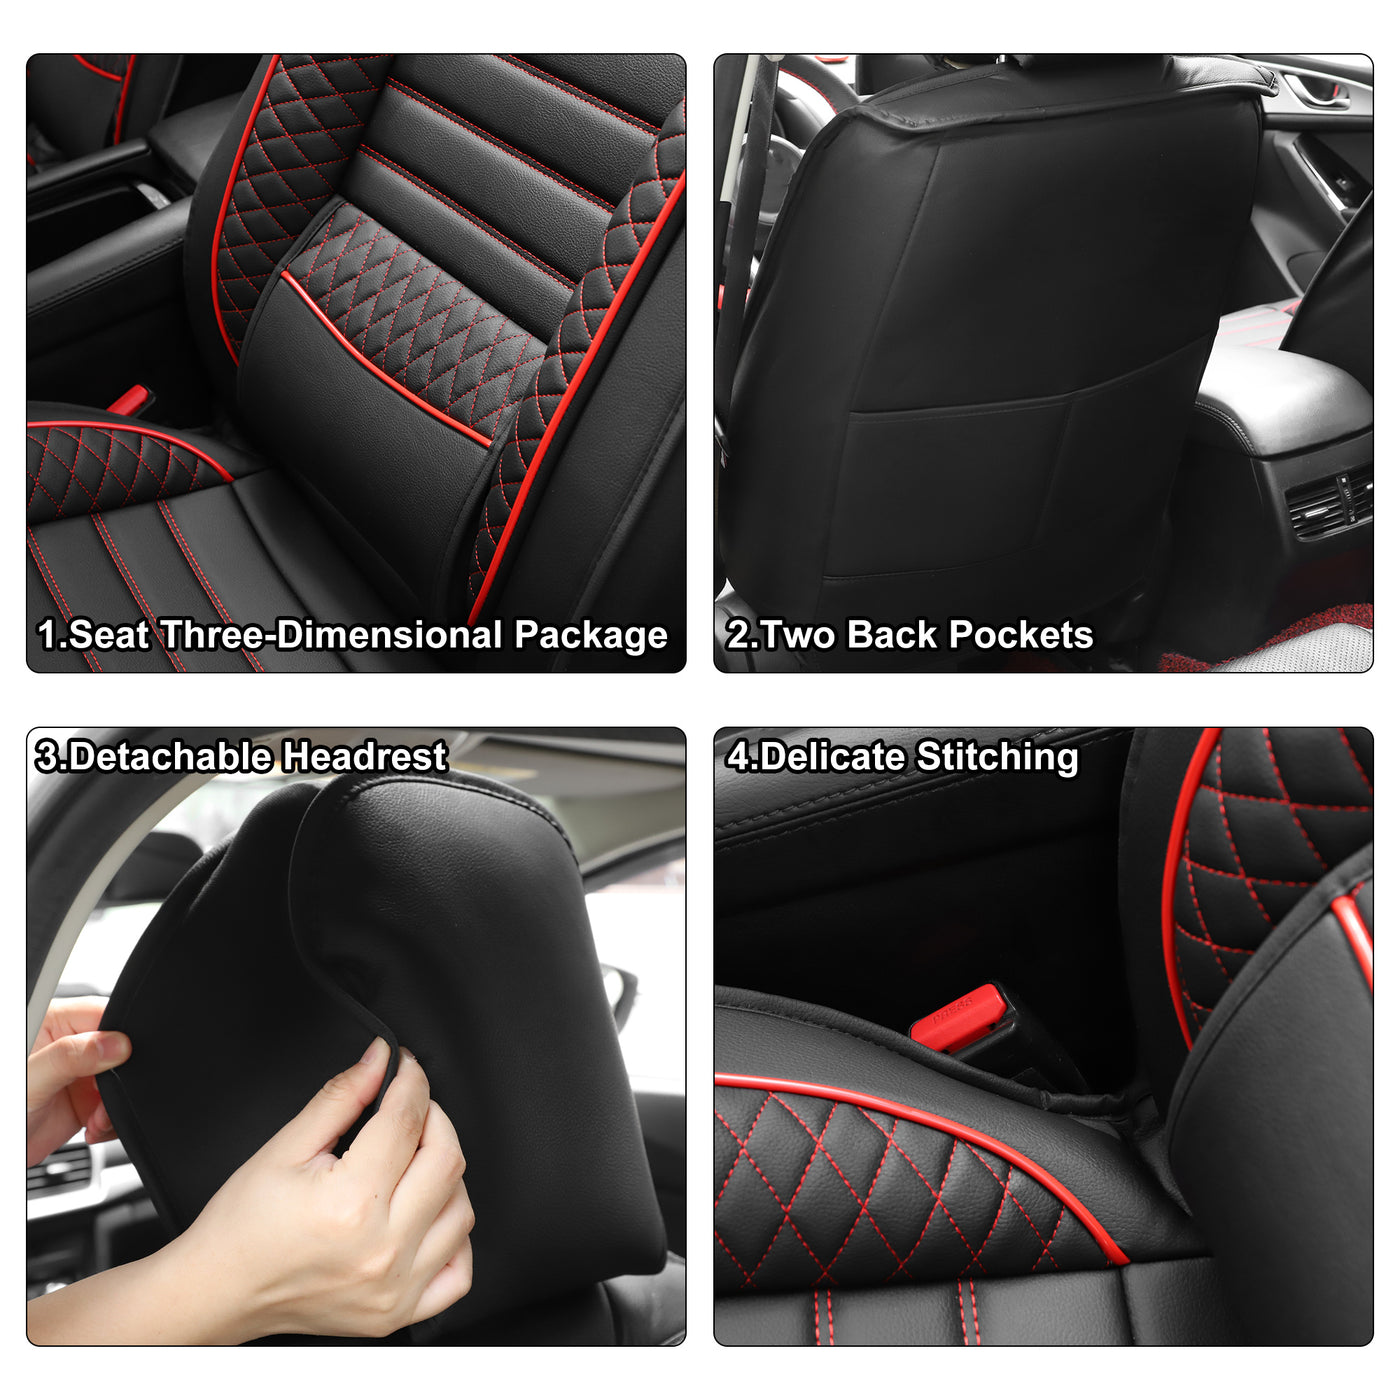 ACROPIX 2 Seat Leather Universal Car Seat Covers Seat Protectors Waterproof Vehicle Cushion Cover for Front Seat SUV Pick-up Trucks with Lumbar Support - Pack of 2